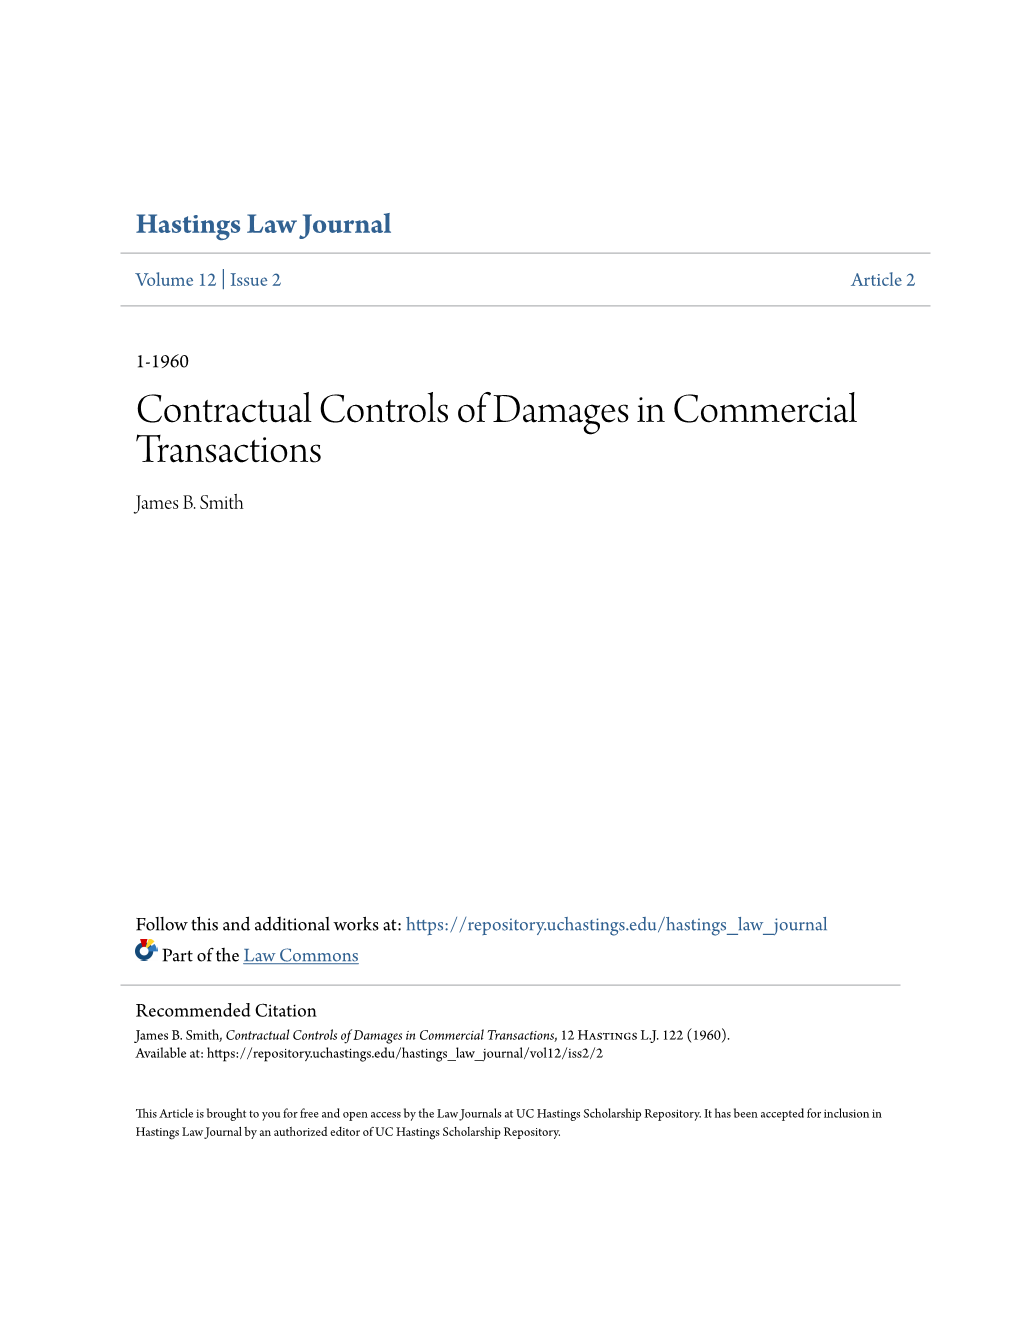 Contractual Controls of Damages in Commercial Transactions James B